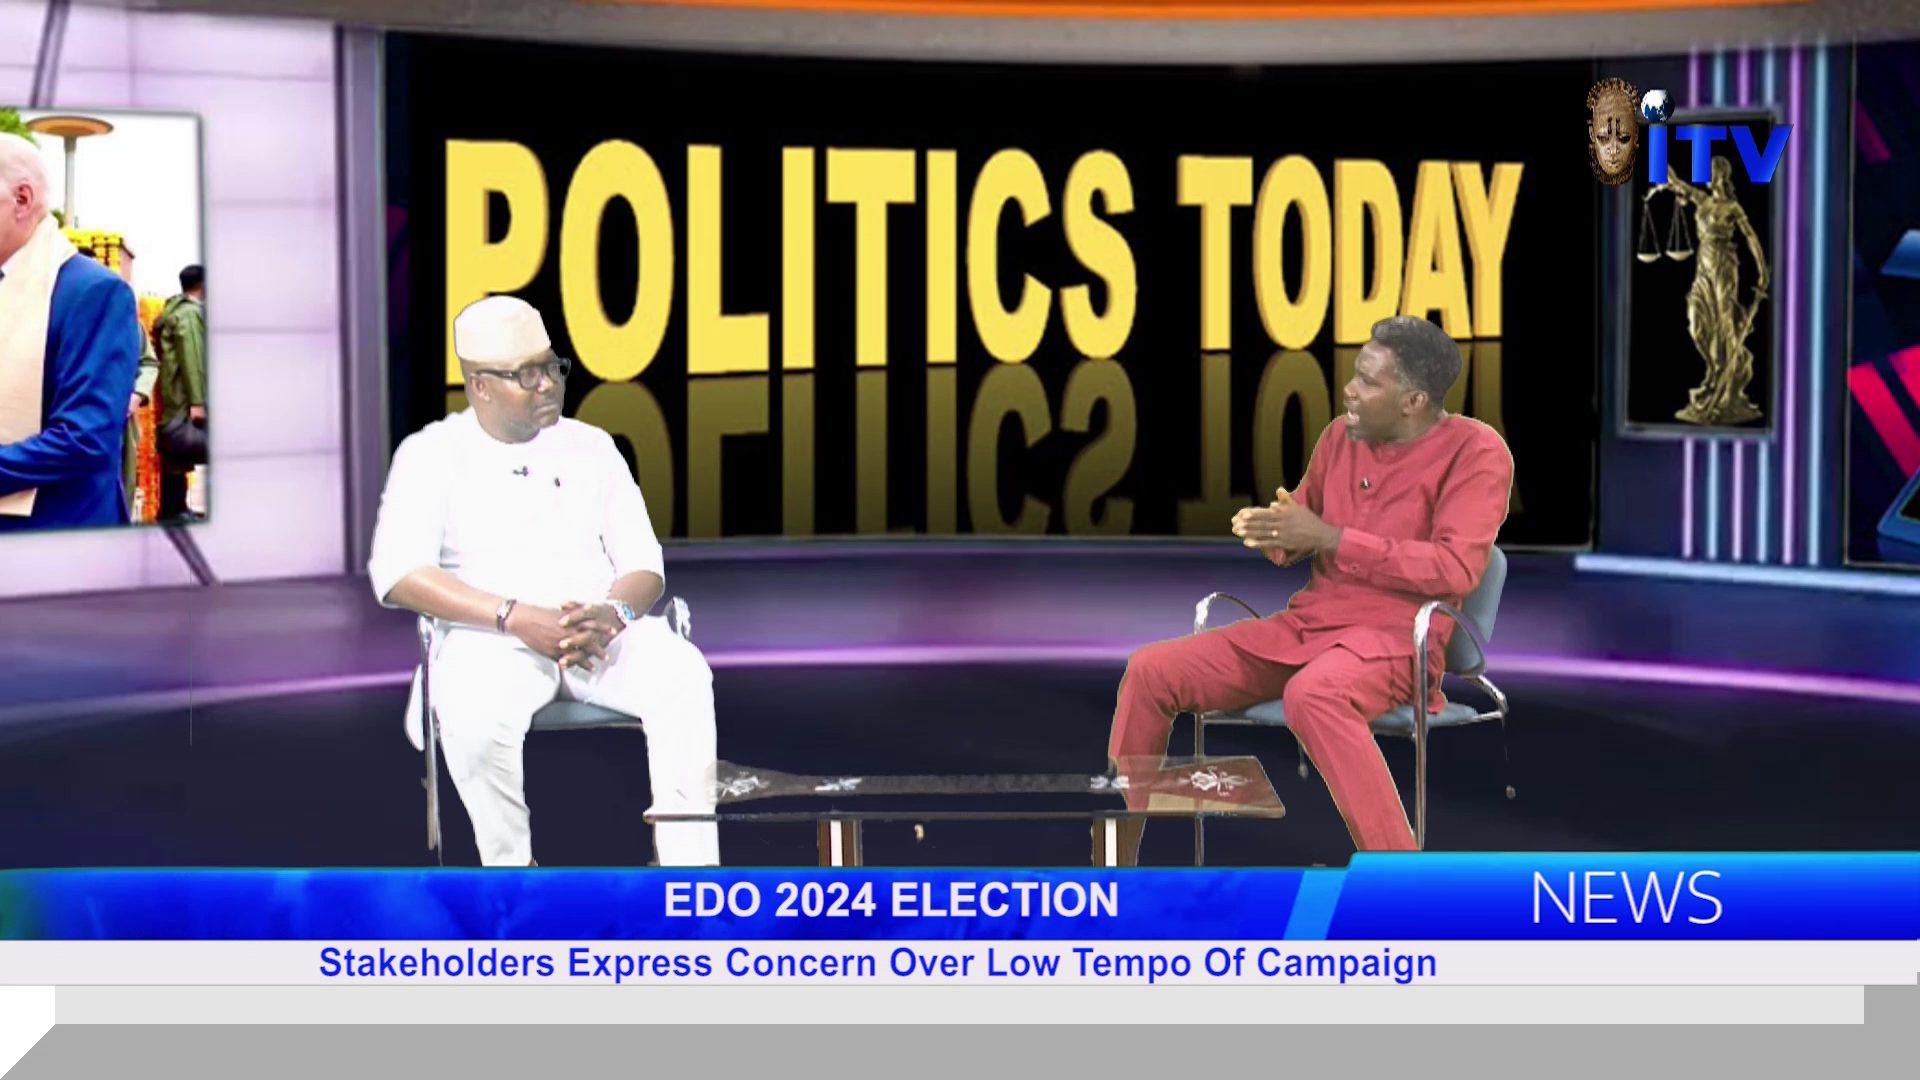 Edo 2024 Election: Stakeholders Express Concern Over Low Tempo Of Campaign